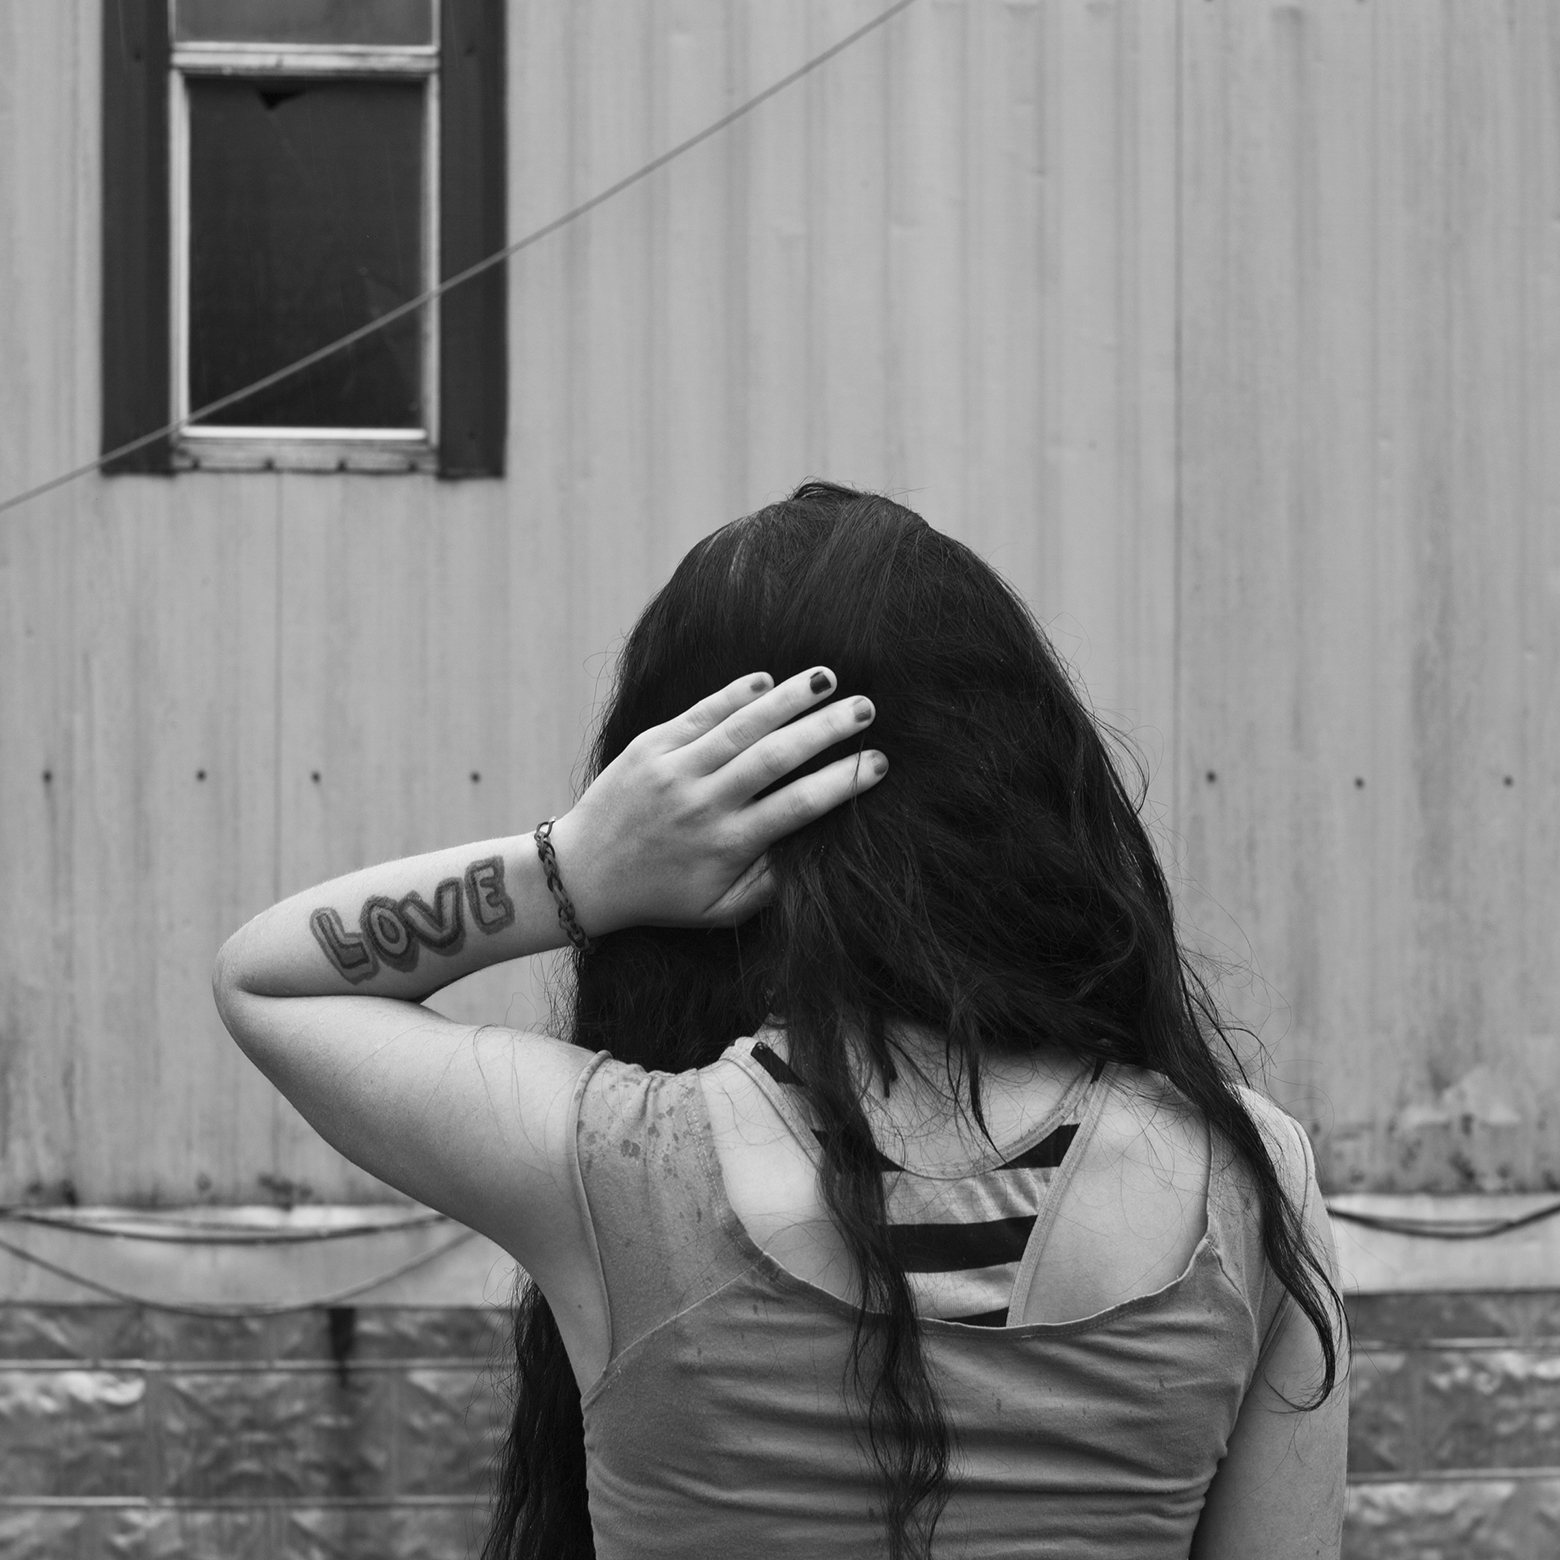 The top half of a young woman with long, dark hair from the back with her left hand on the back of her head. She is wearing layered tank tops and has a prominent tattoo of the word “LOVE” on her left forearm. She is looking at a building with a window.